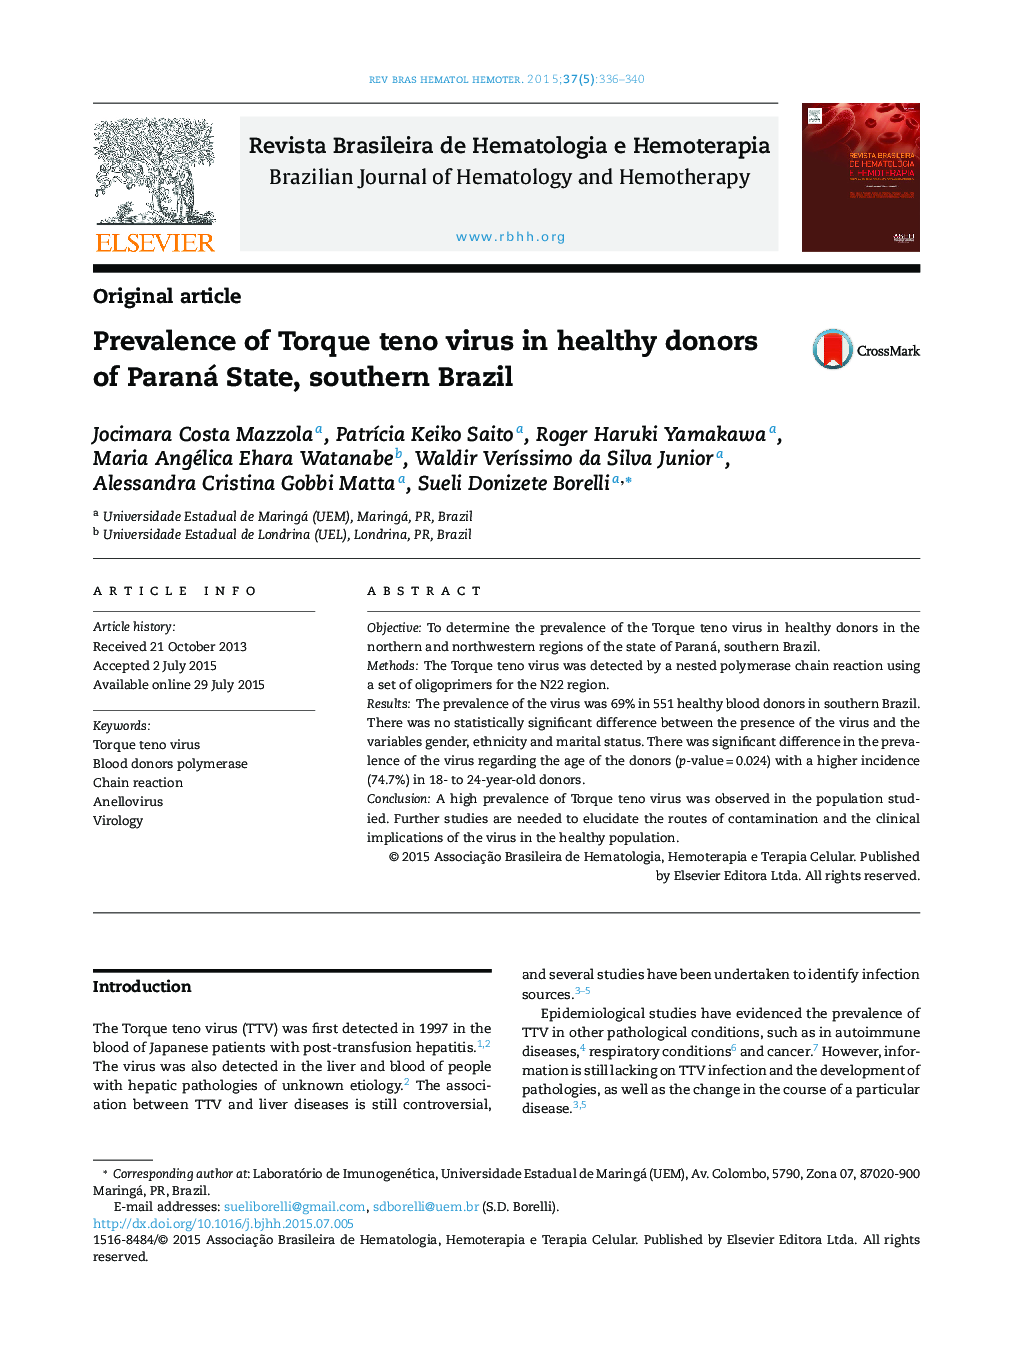 Prevalence of Torque teno virus in healthy donors of Paraná State, southern Brazil